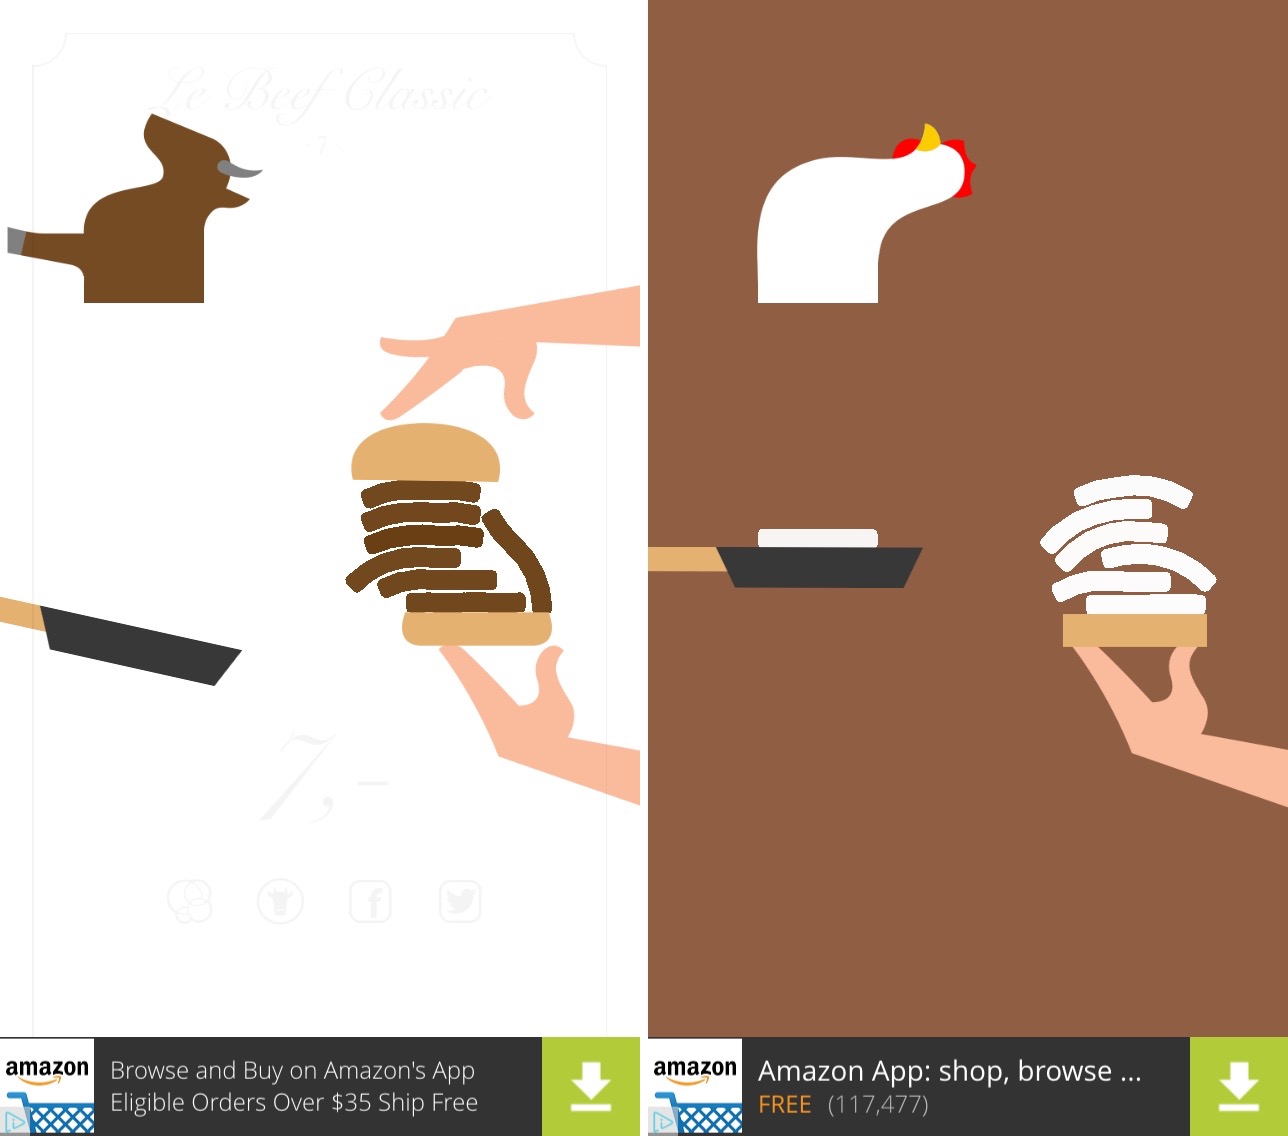 Burger – The Game Lets You Flip Your Way To Chef Stardom